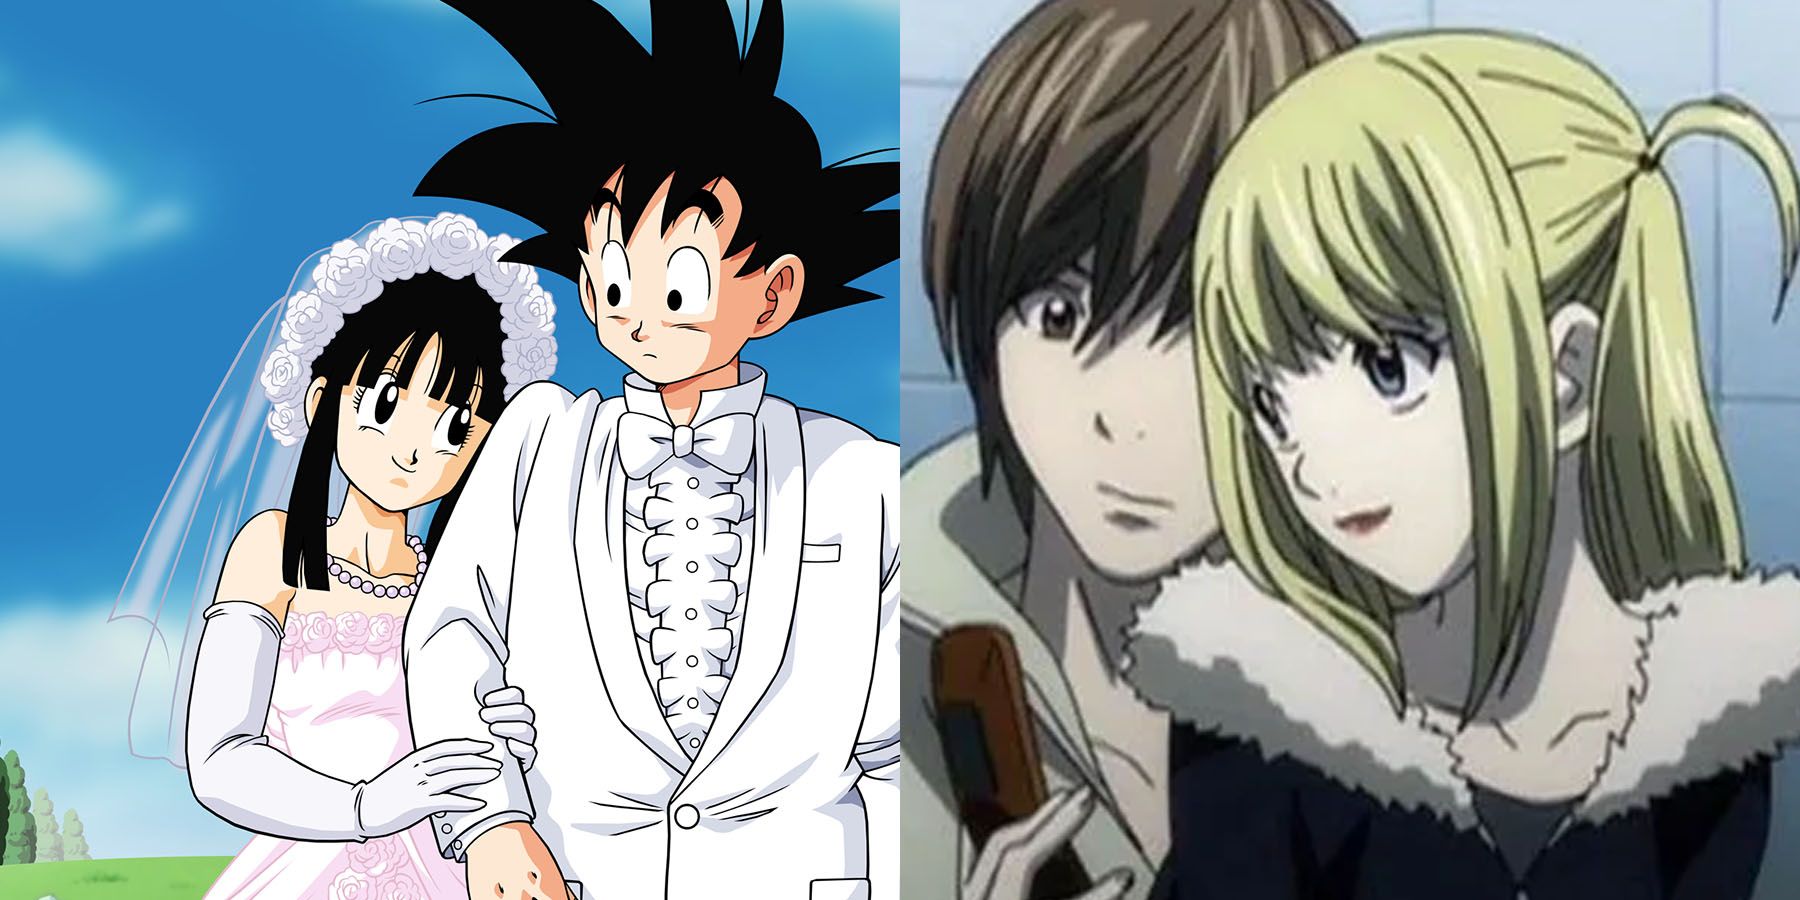 The Most Controversial Anime Shows That Caused Public Outrage